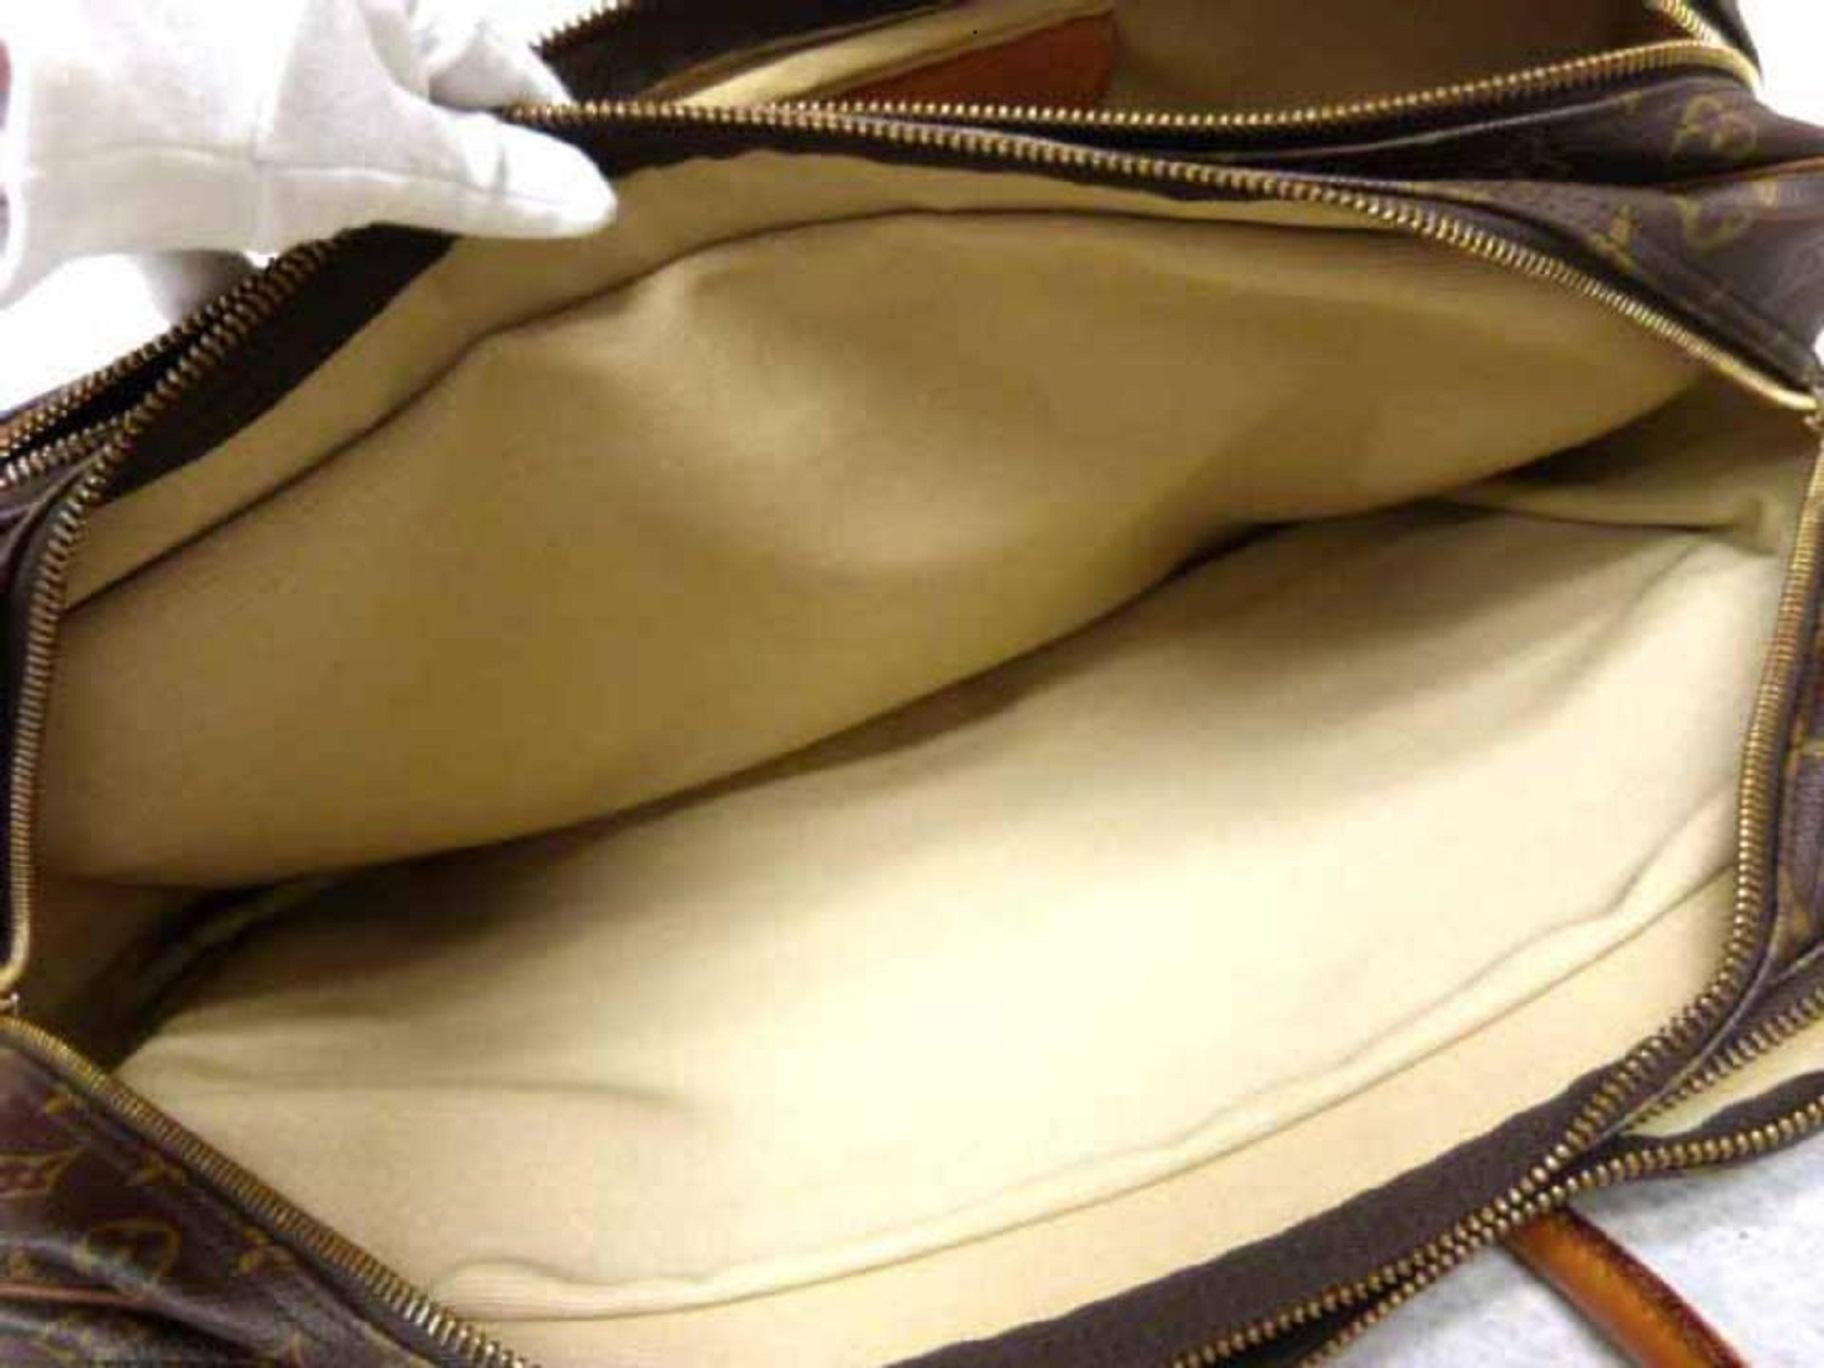 Louis Vuitton Poche Sac Trois 223277 Brown Coated Canvas Weekend/Travel Bag In Good Condition For Sale In Dix hills, NY